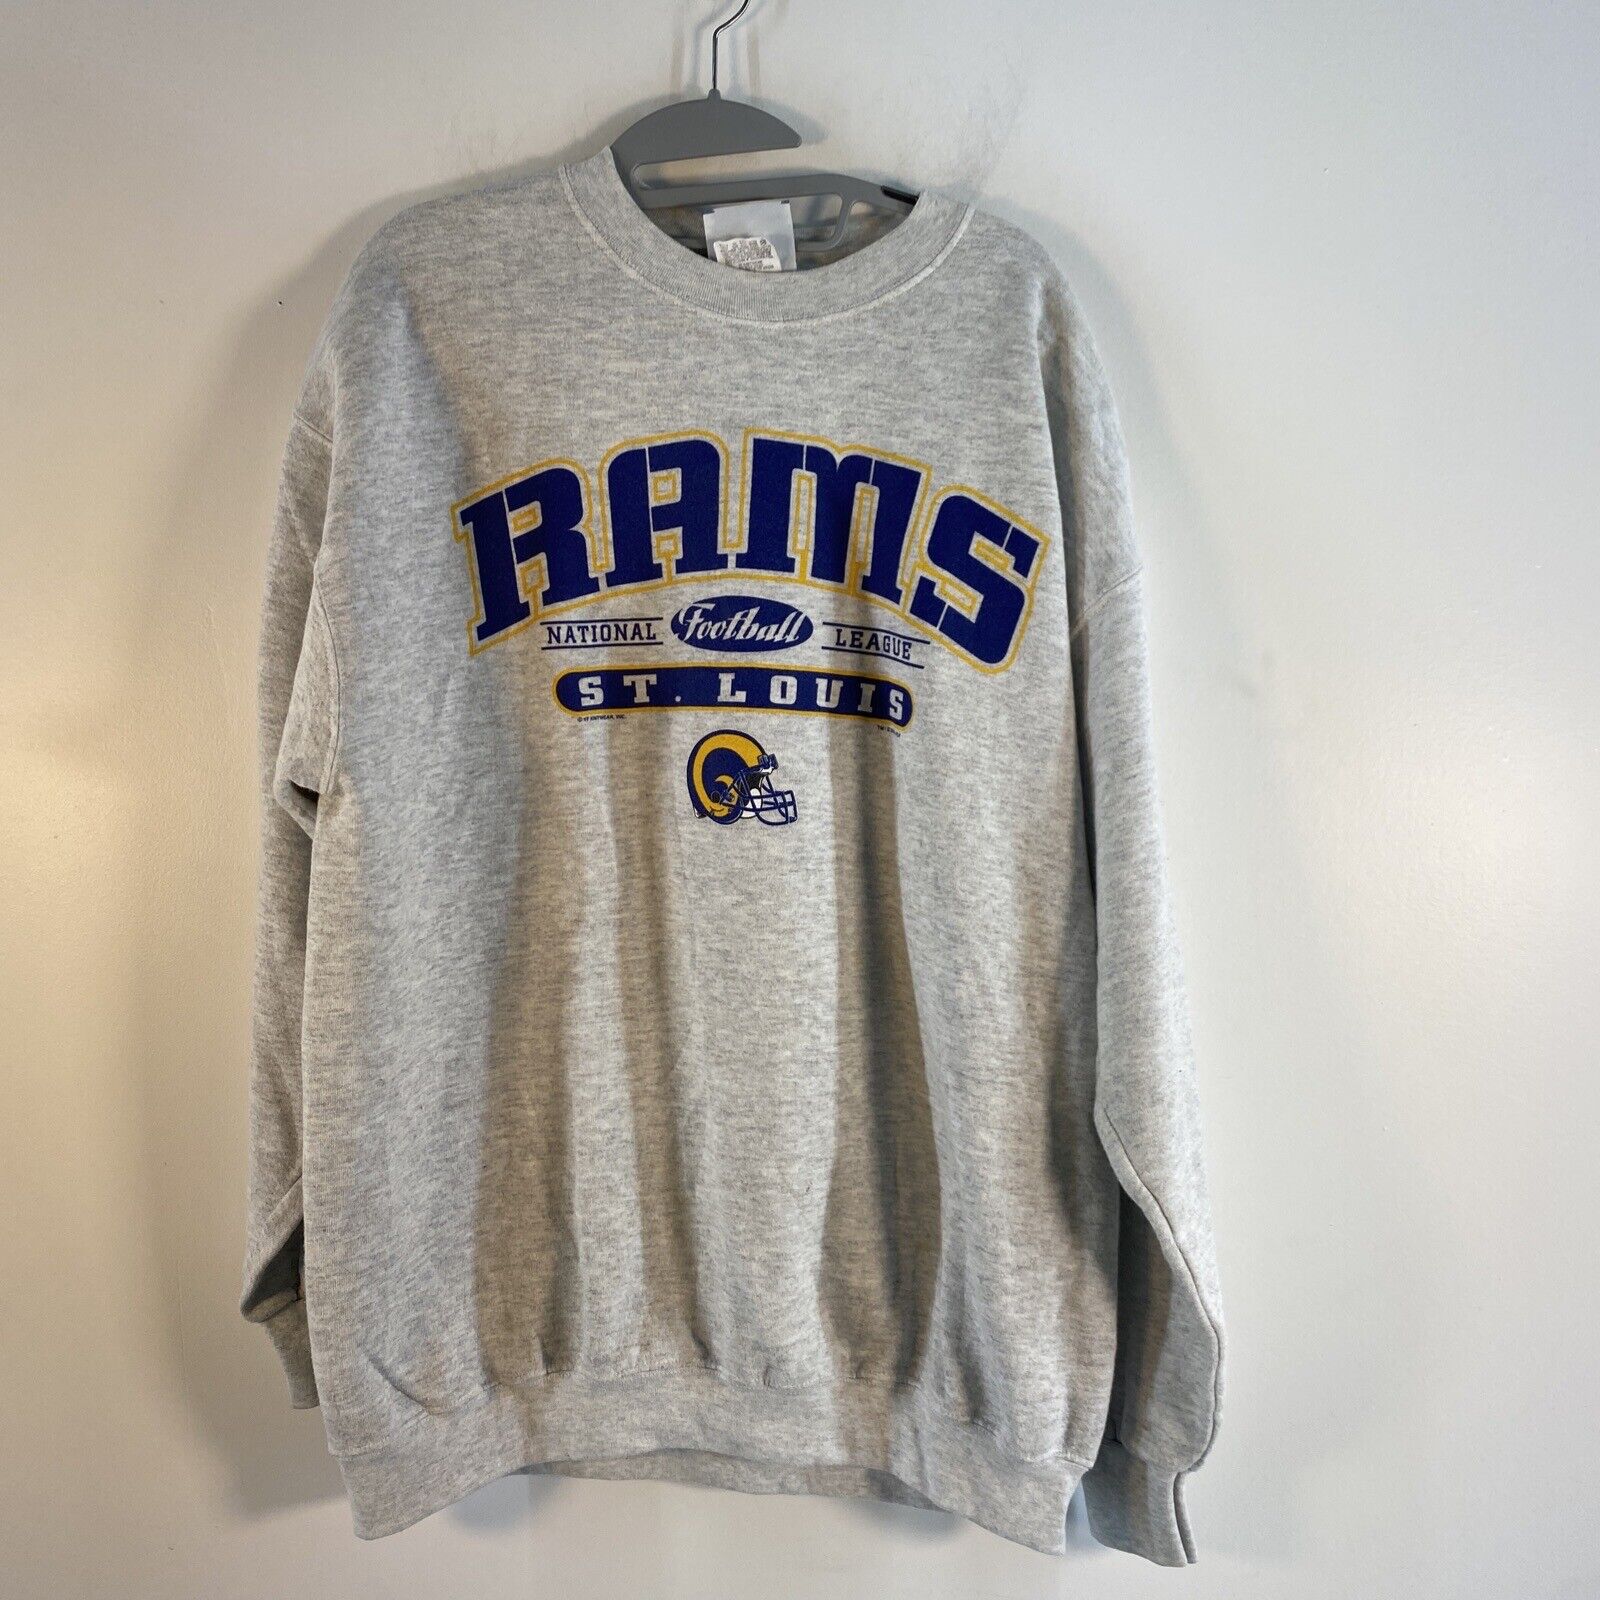 Vintage 90s NFL St. Louis Rams Suede Leather Bomber Jacket 